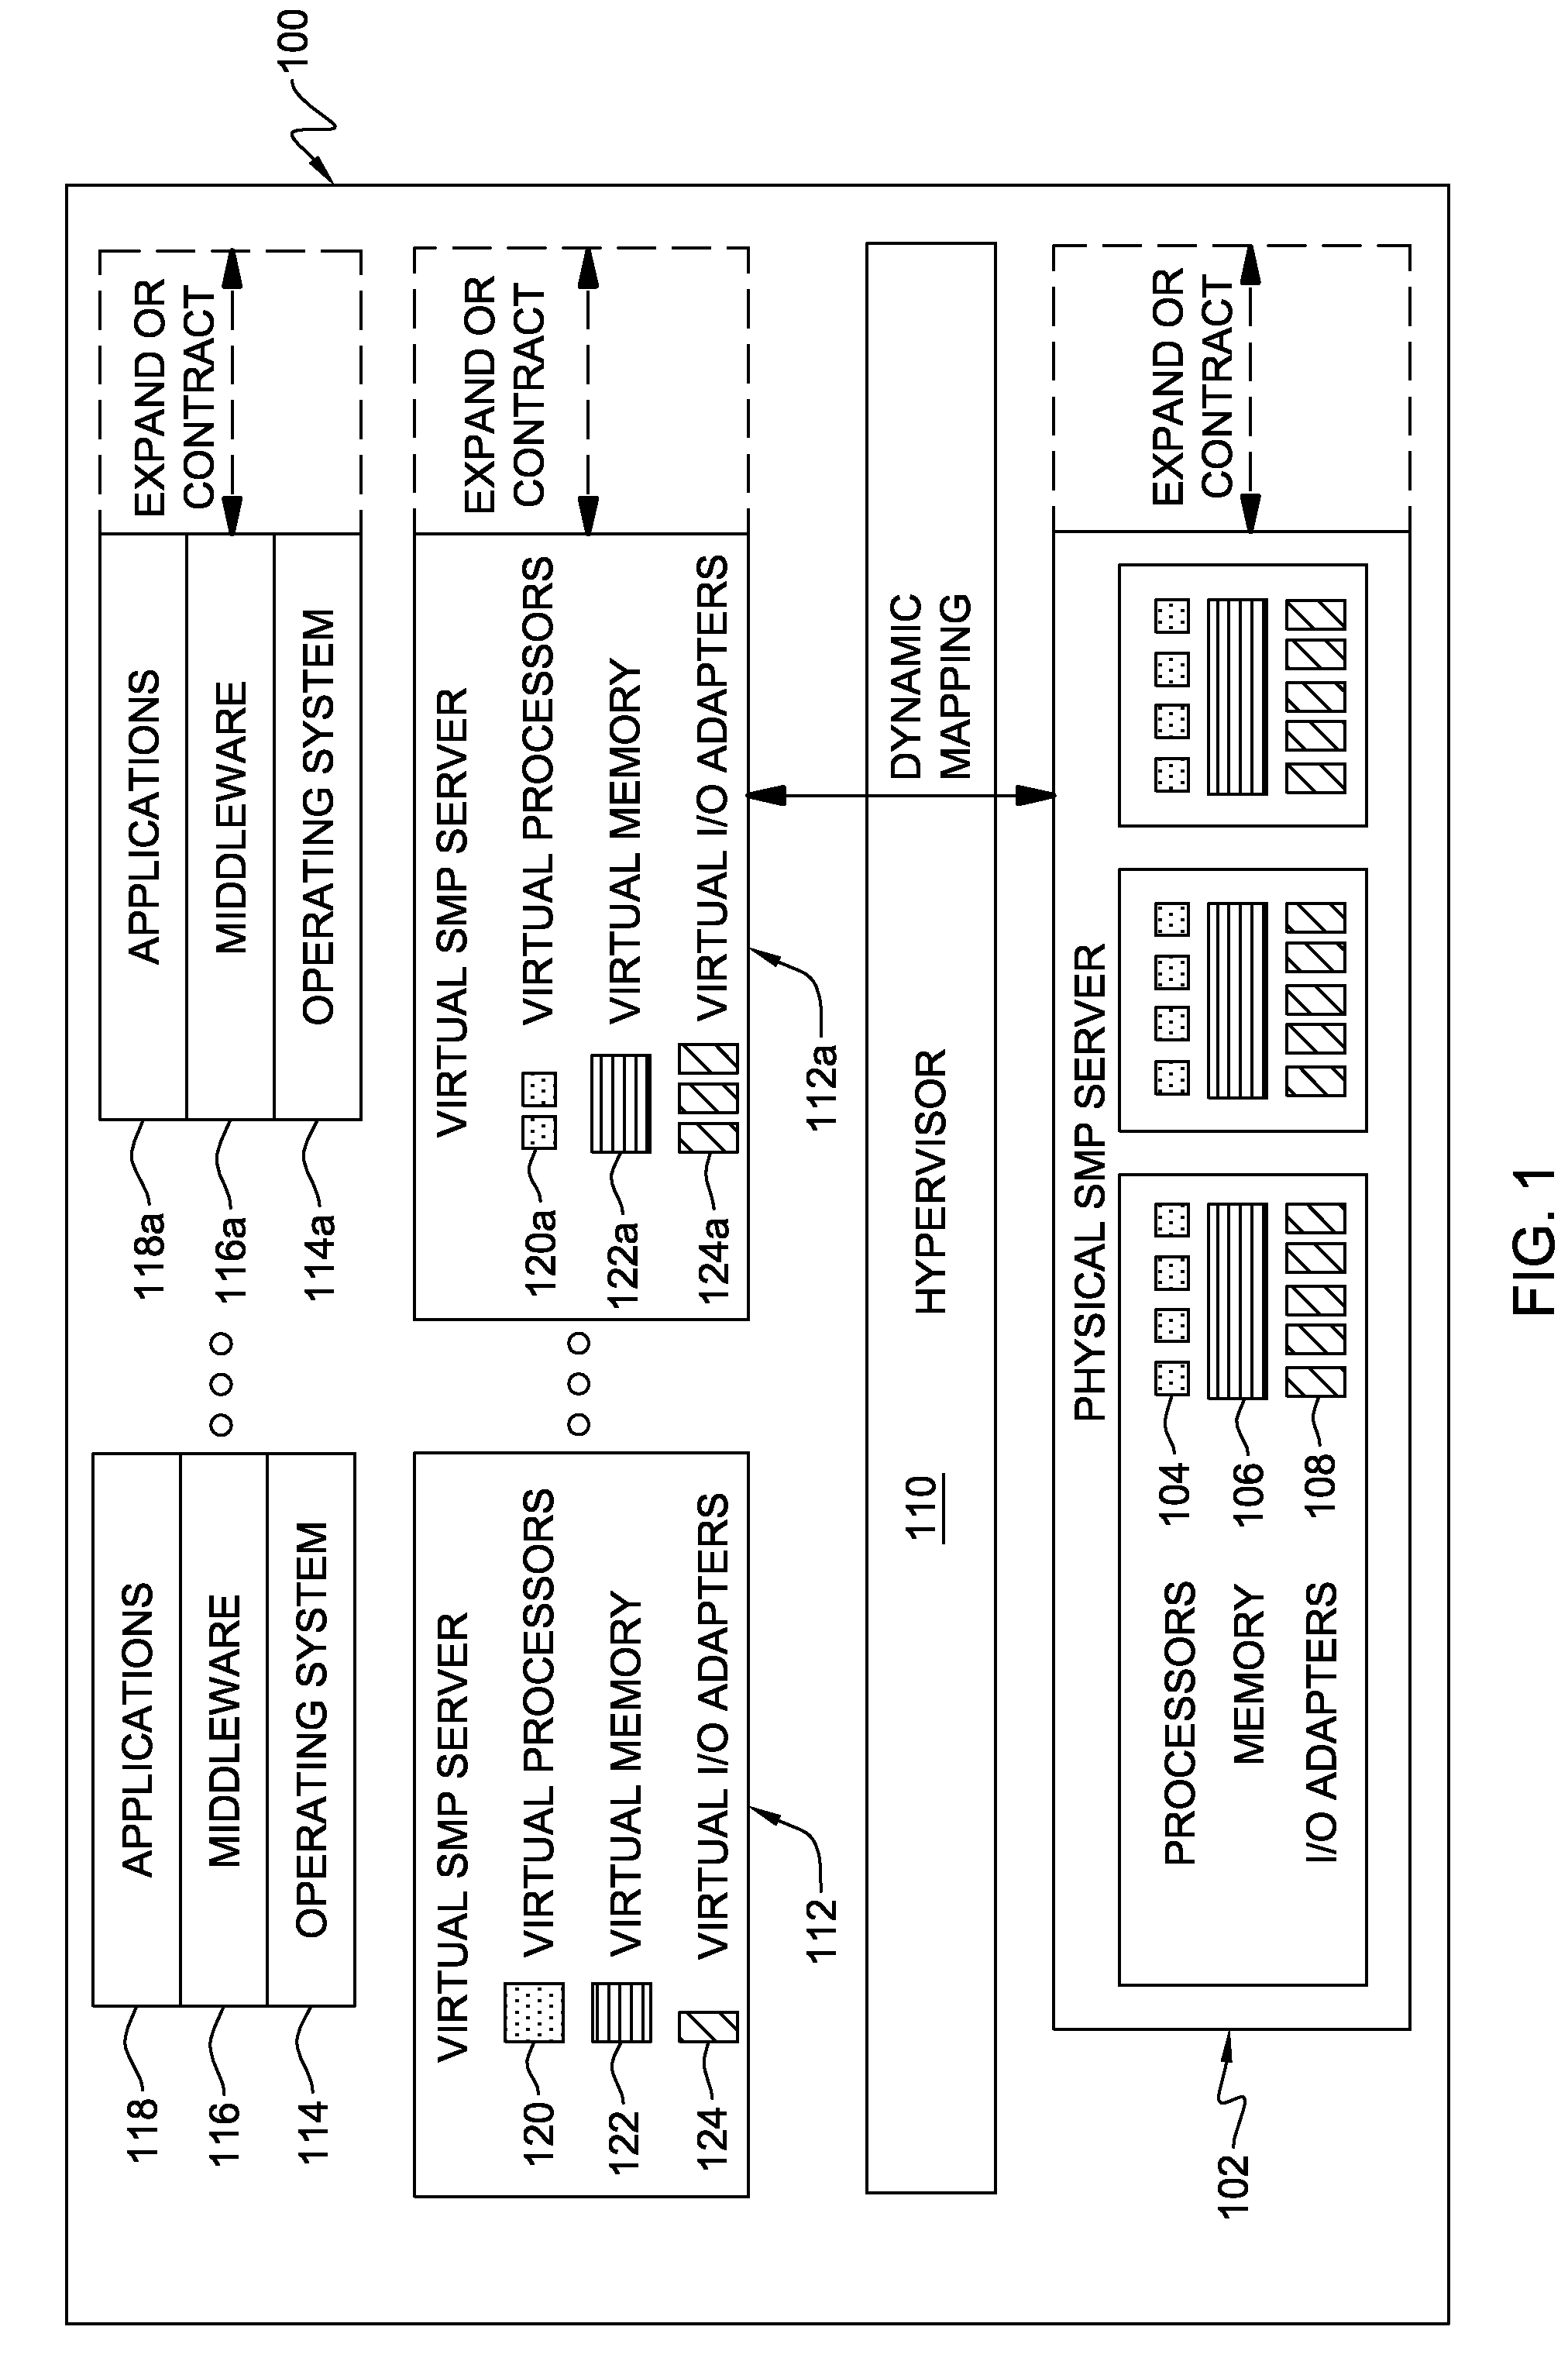 Transparent Hypervisor Pinning of Critical Memory Areas in a Shared Memory Partition Data Processing System